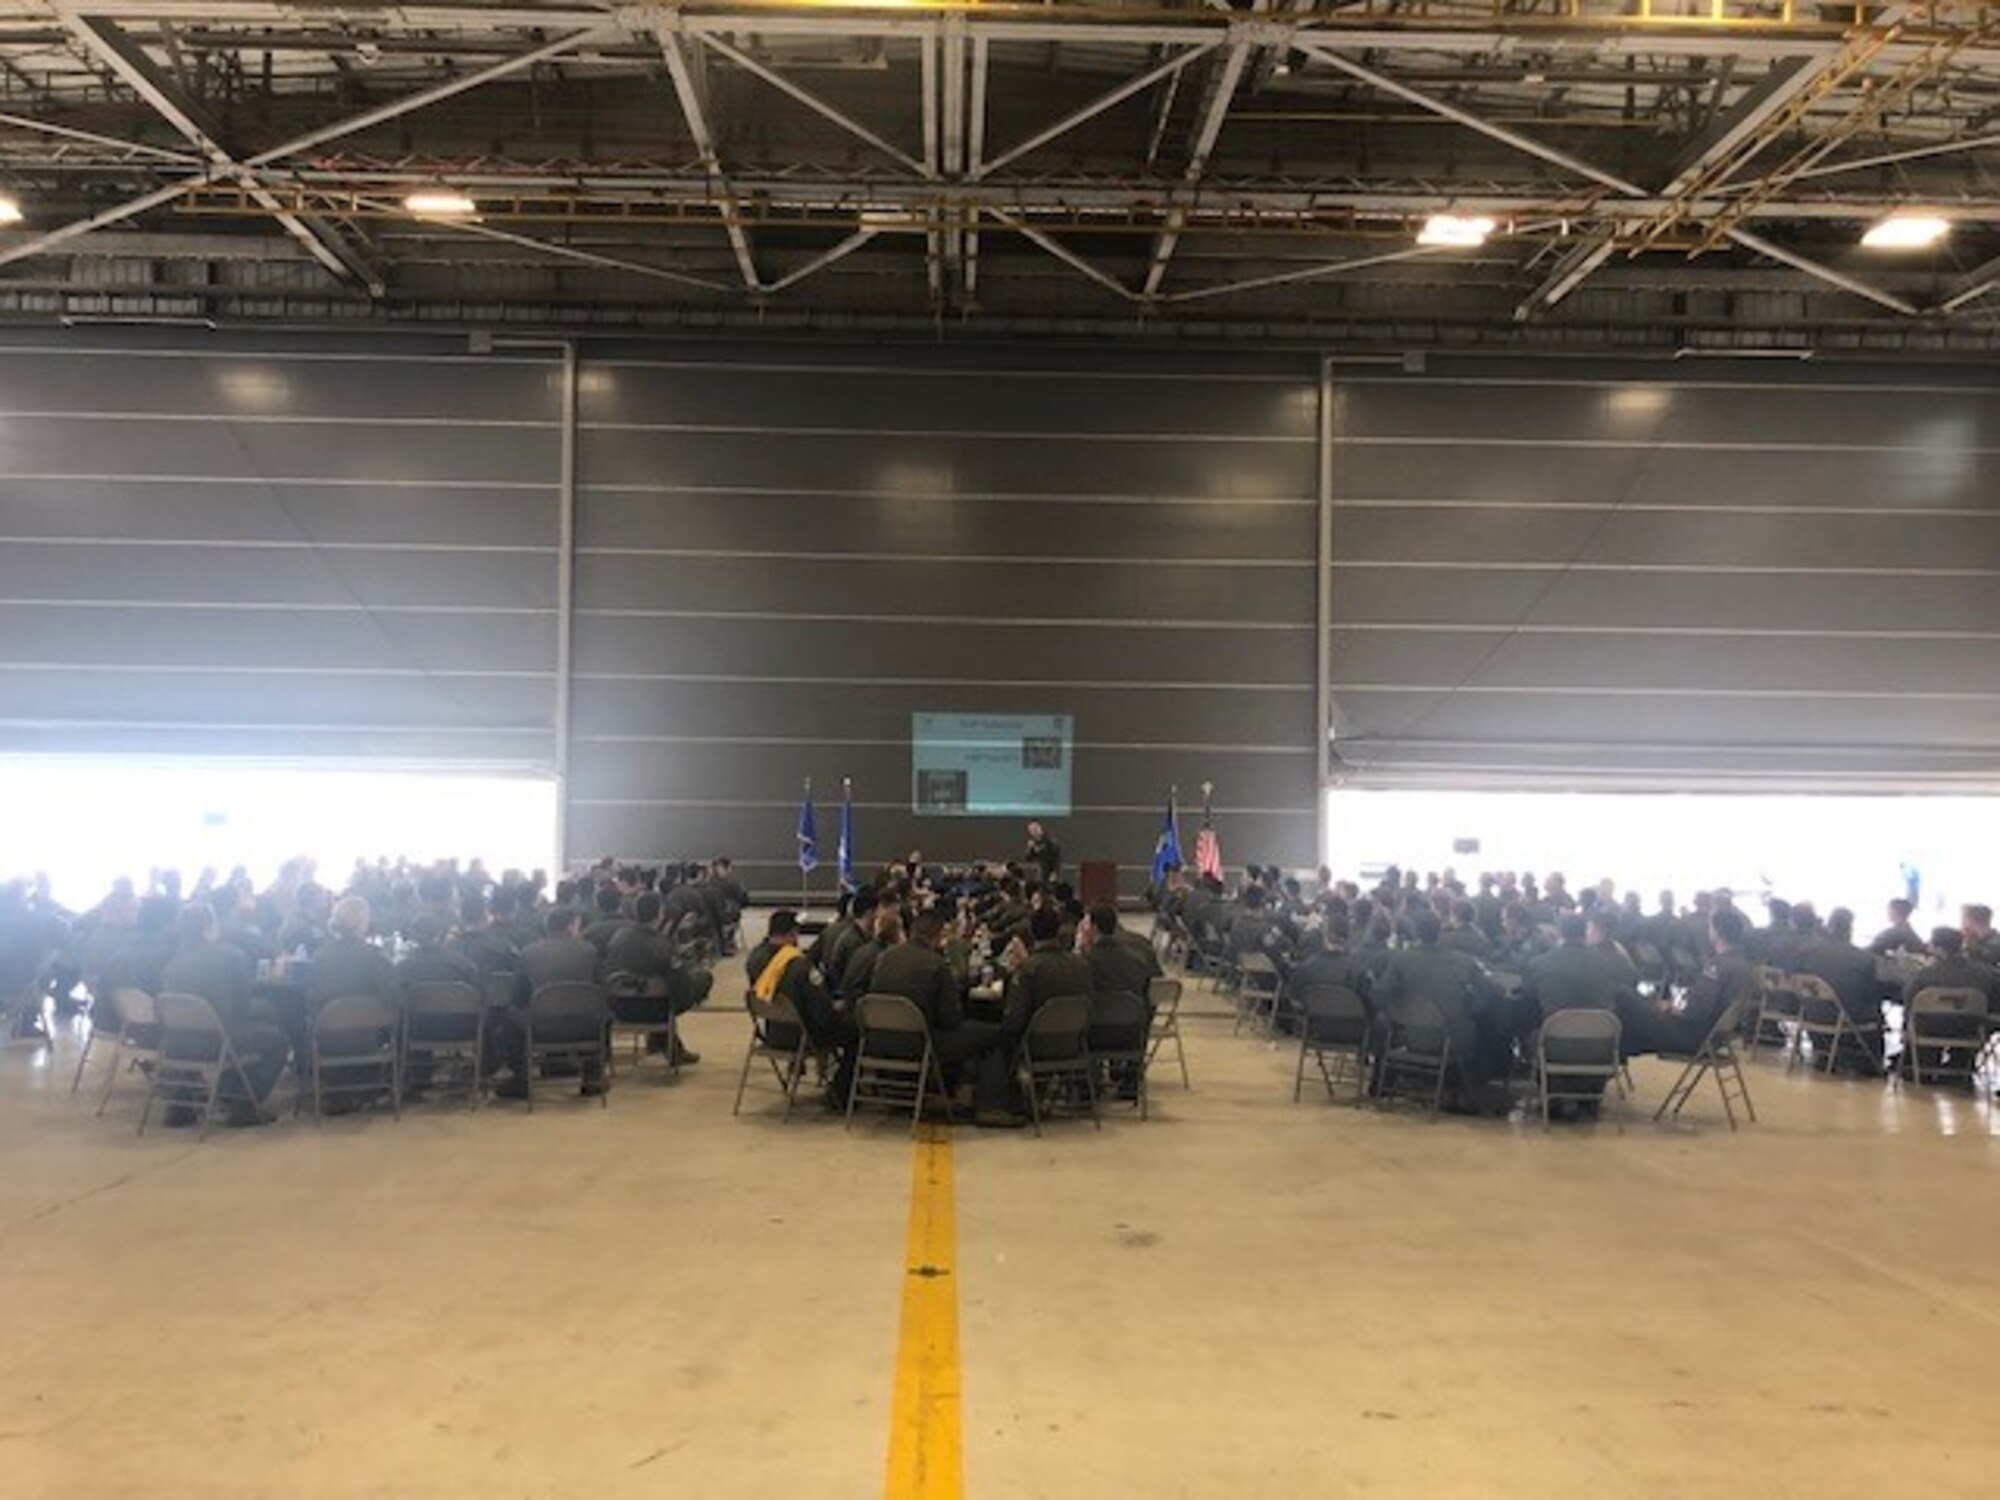 Maj. Gen. Craig Wills, 19th Air Force commander, briefs over 200 first assignment instructor pilots Aug. 9, 2019, during FAIP Flag on Naval Air Station Fort Worth Joint Reserve Base, New Orleans. The slides presented by Wills were tailored to the competition, innovation and how to move forward as a FAIP in the U.S. Air Force. (U.S. Air Force photo by 1st Lt. Patricia Pasque)